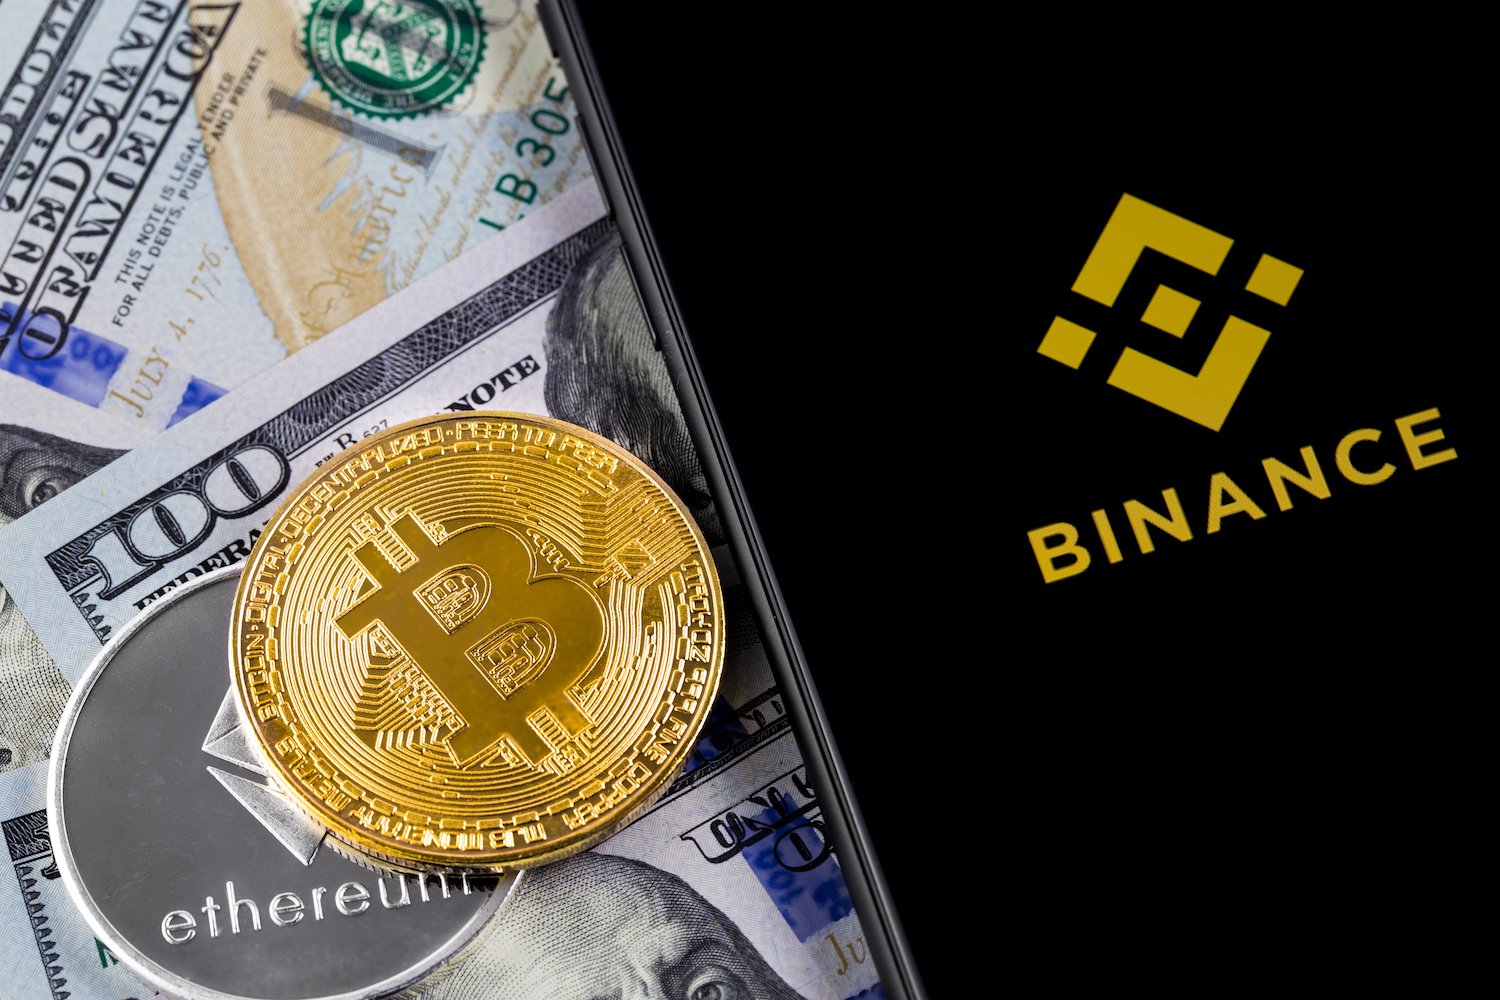 Binance To Disclose Crypto Listing Fees, Donate 100% To Charity